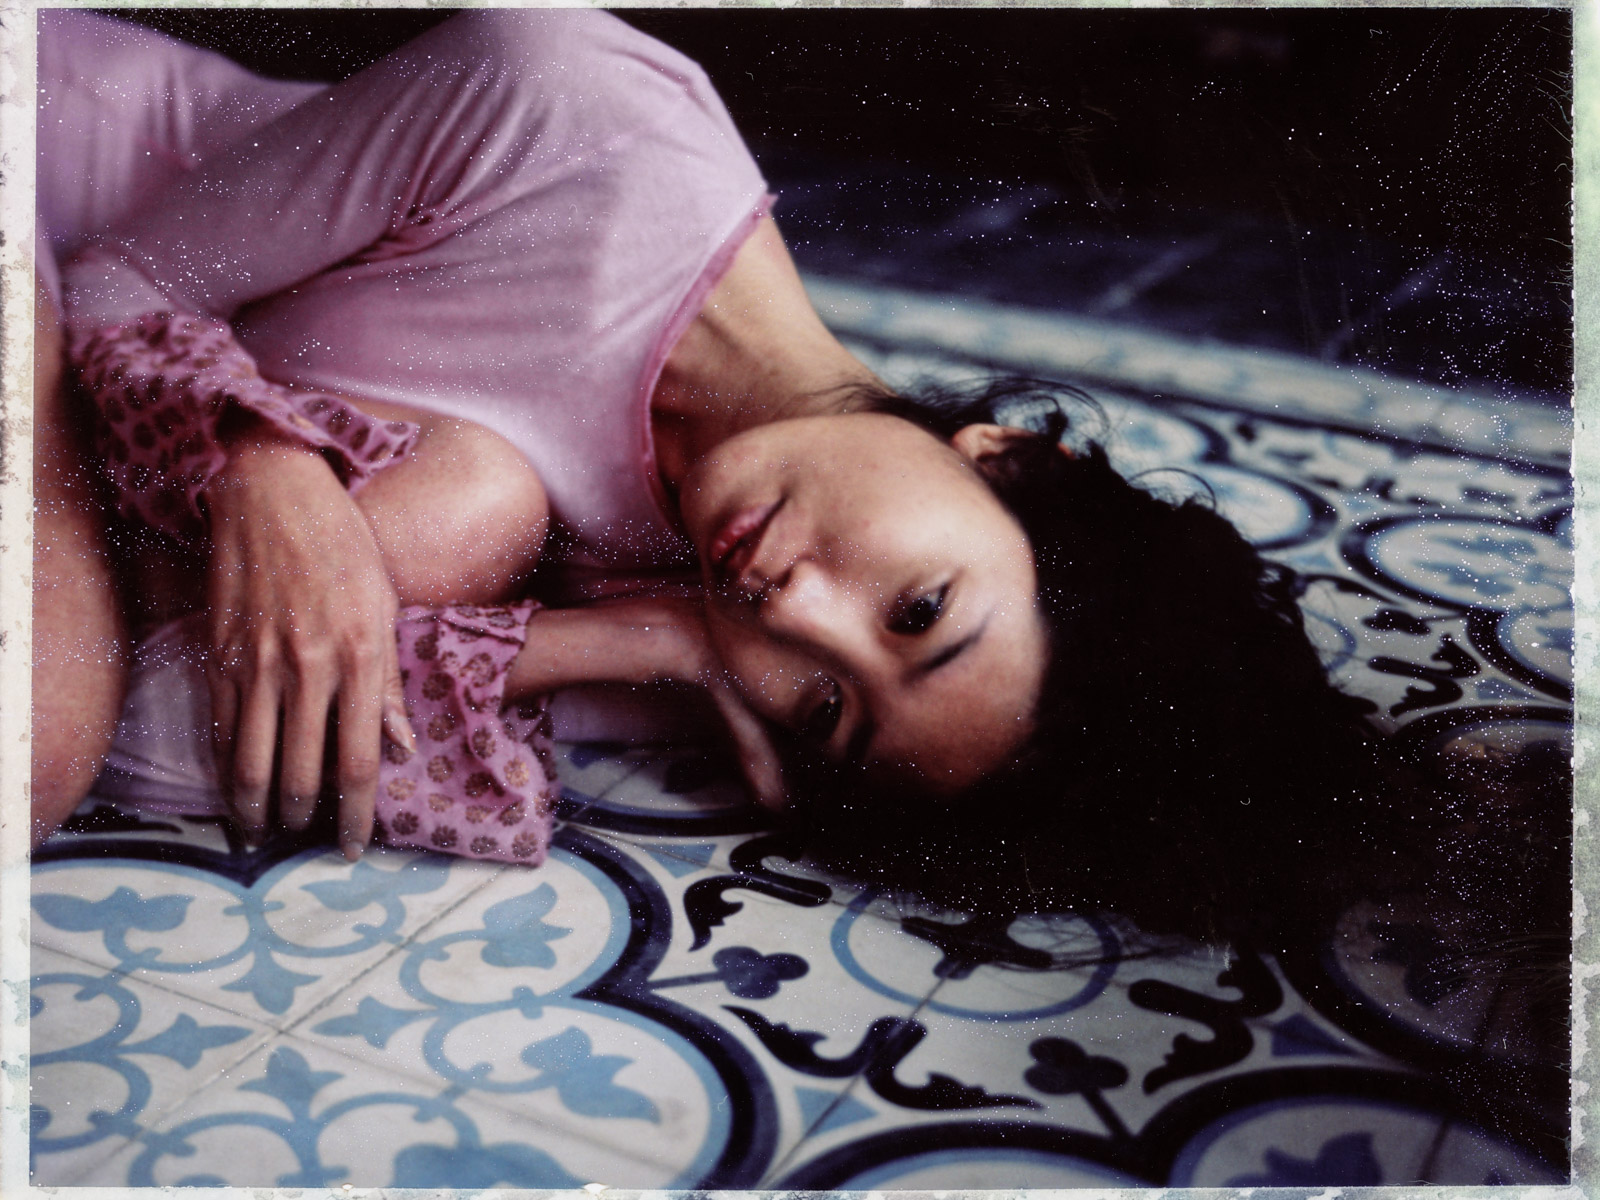 A Polaroid of a young woman in a pink top on a blue-tiled floor at an old home in Hanoi, Vietnam.